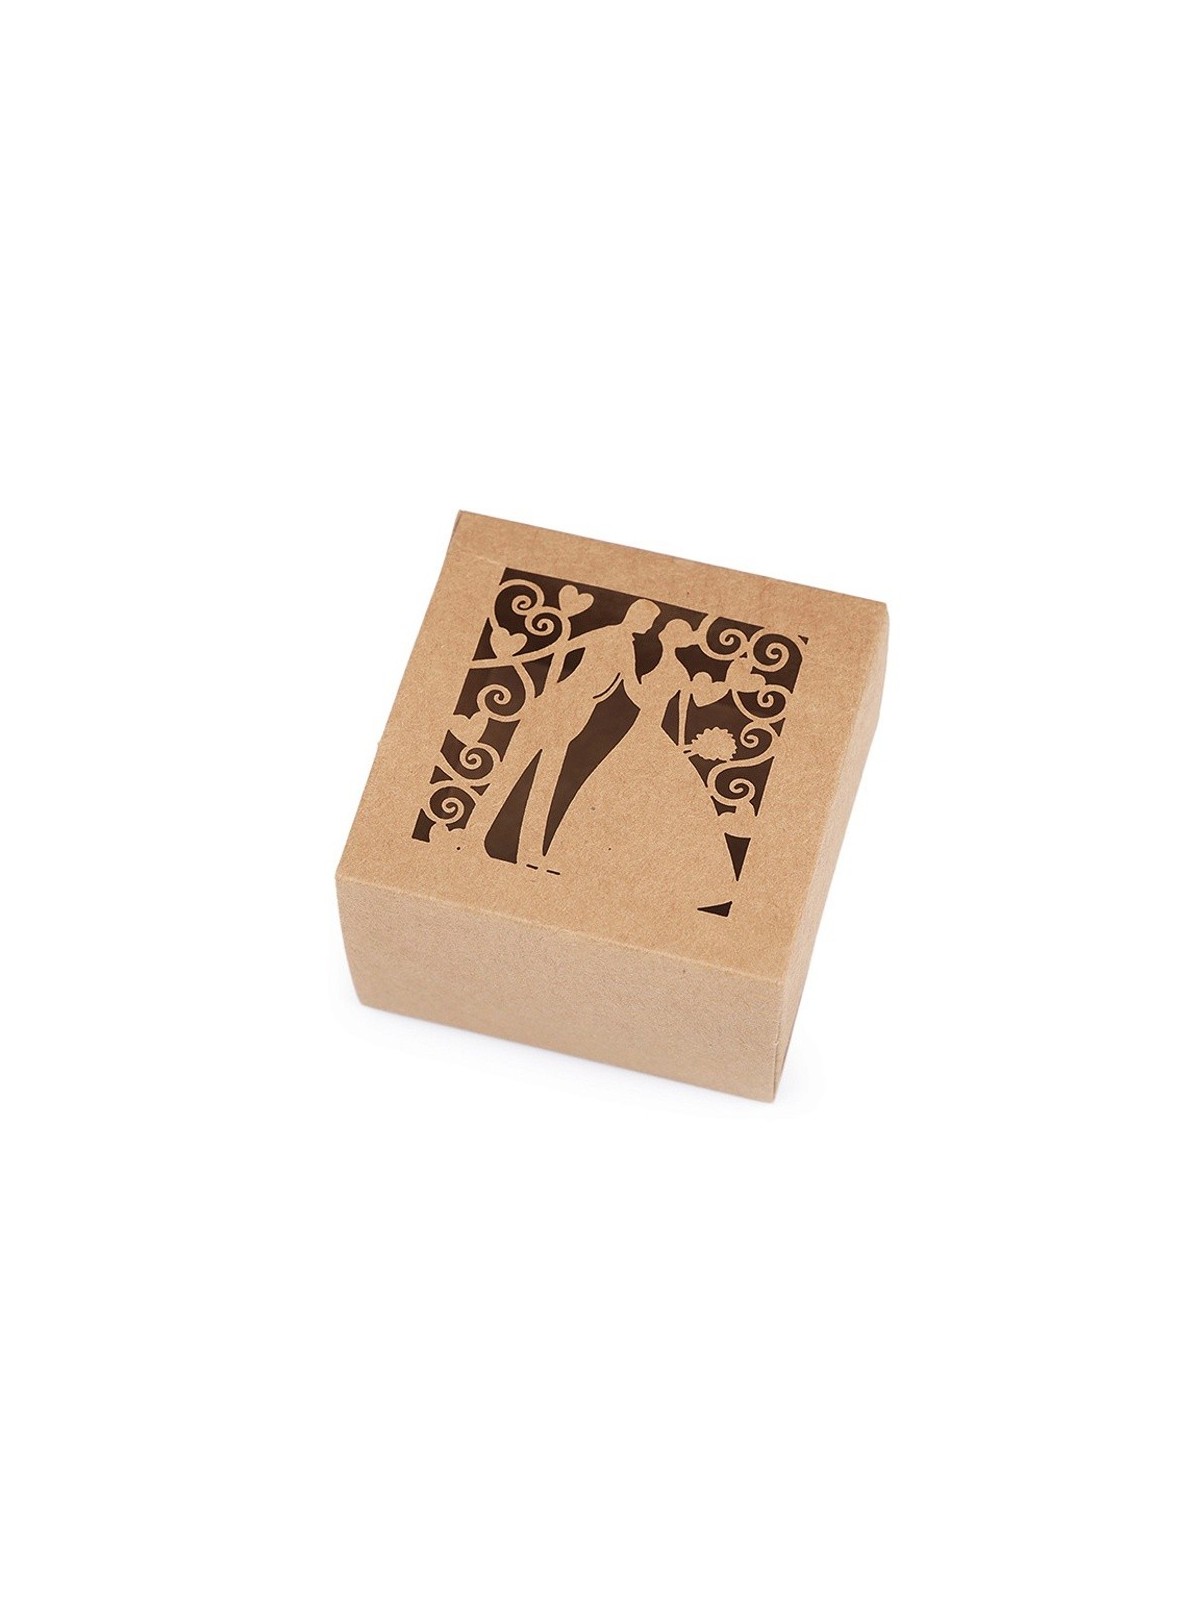 Natural box with carved motif - 6 x 6cm